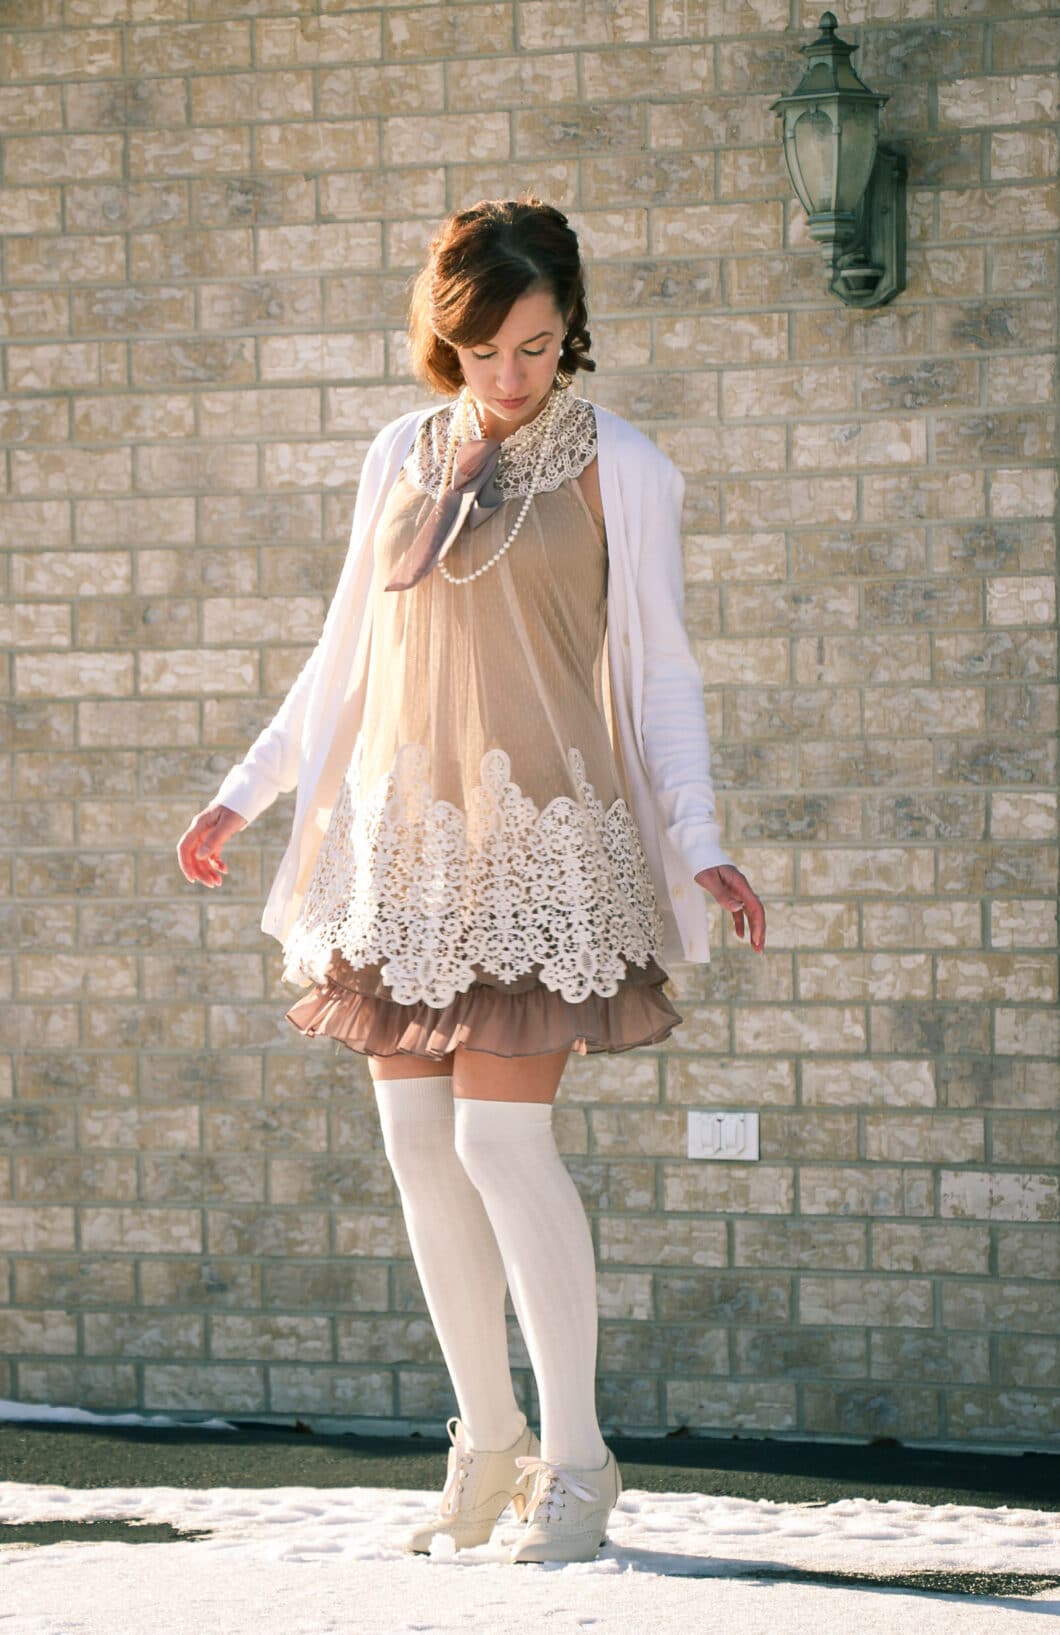 A Frilly Dress & a Feature